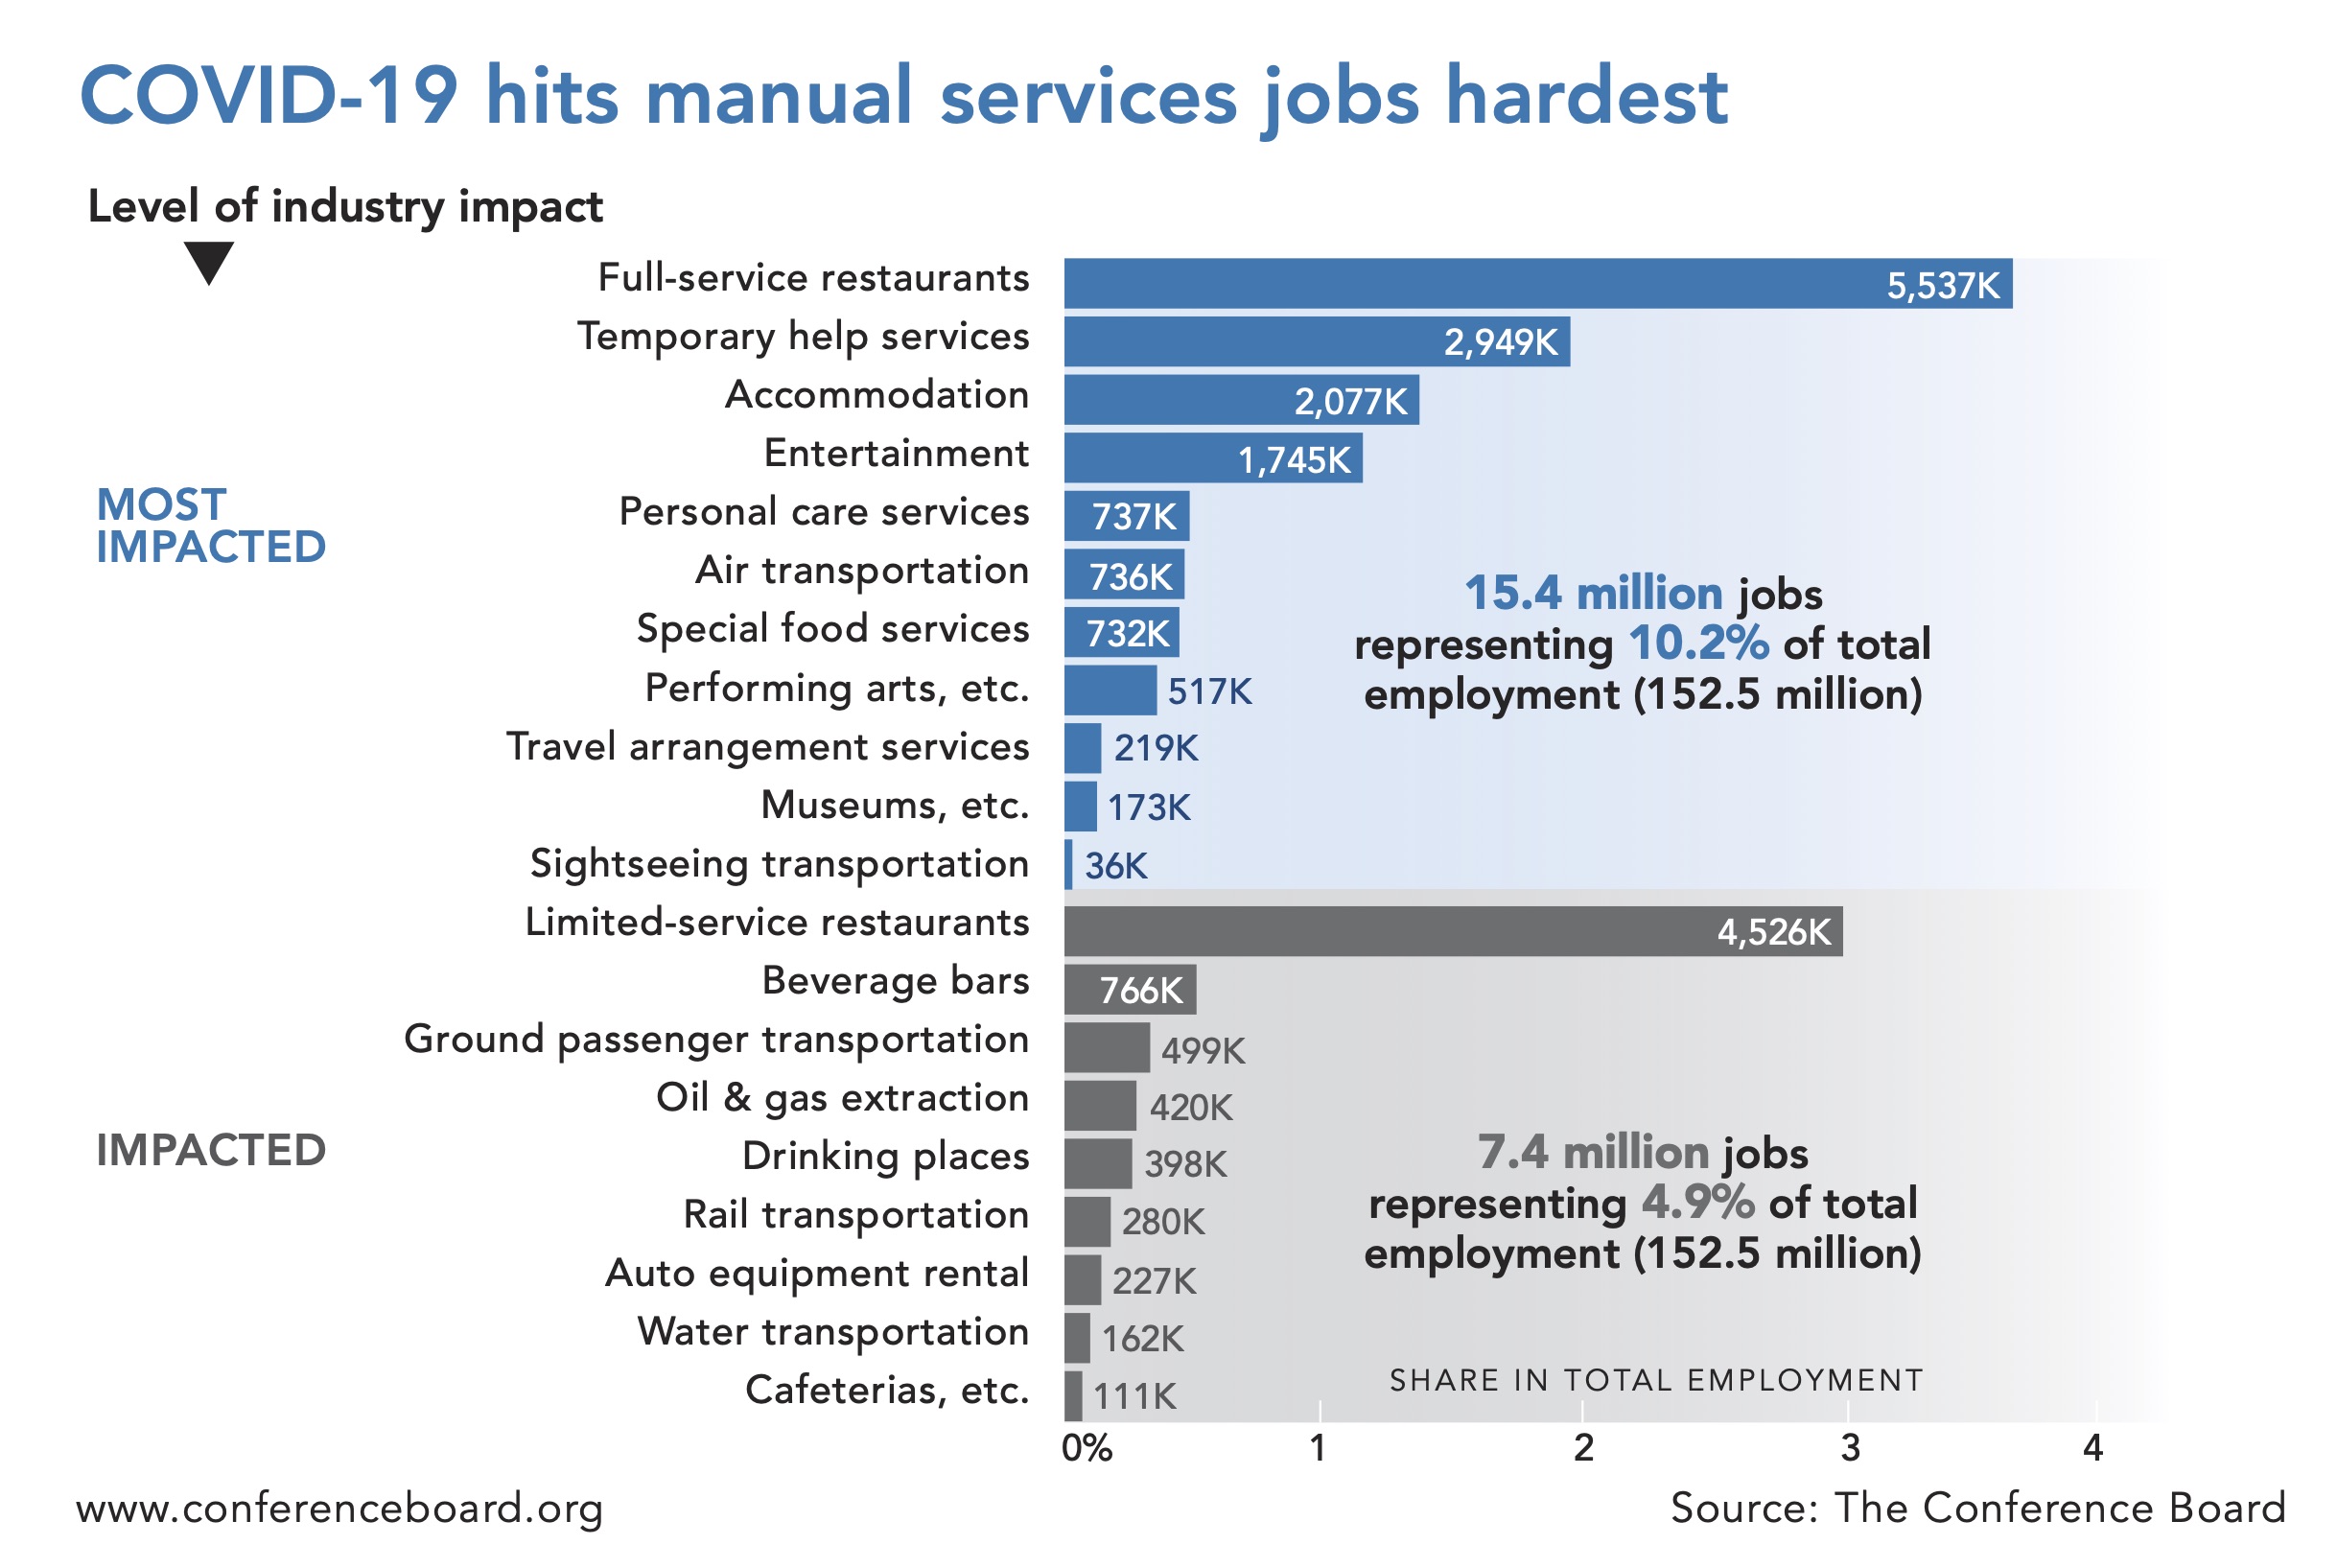 COVID-19 impact is largest on manual services job